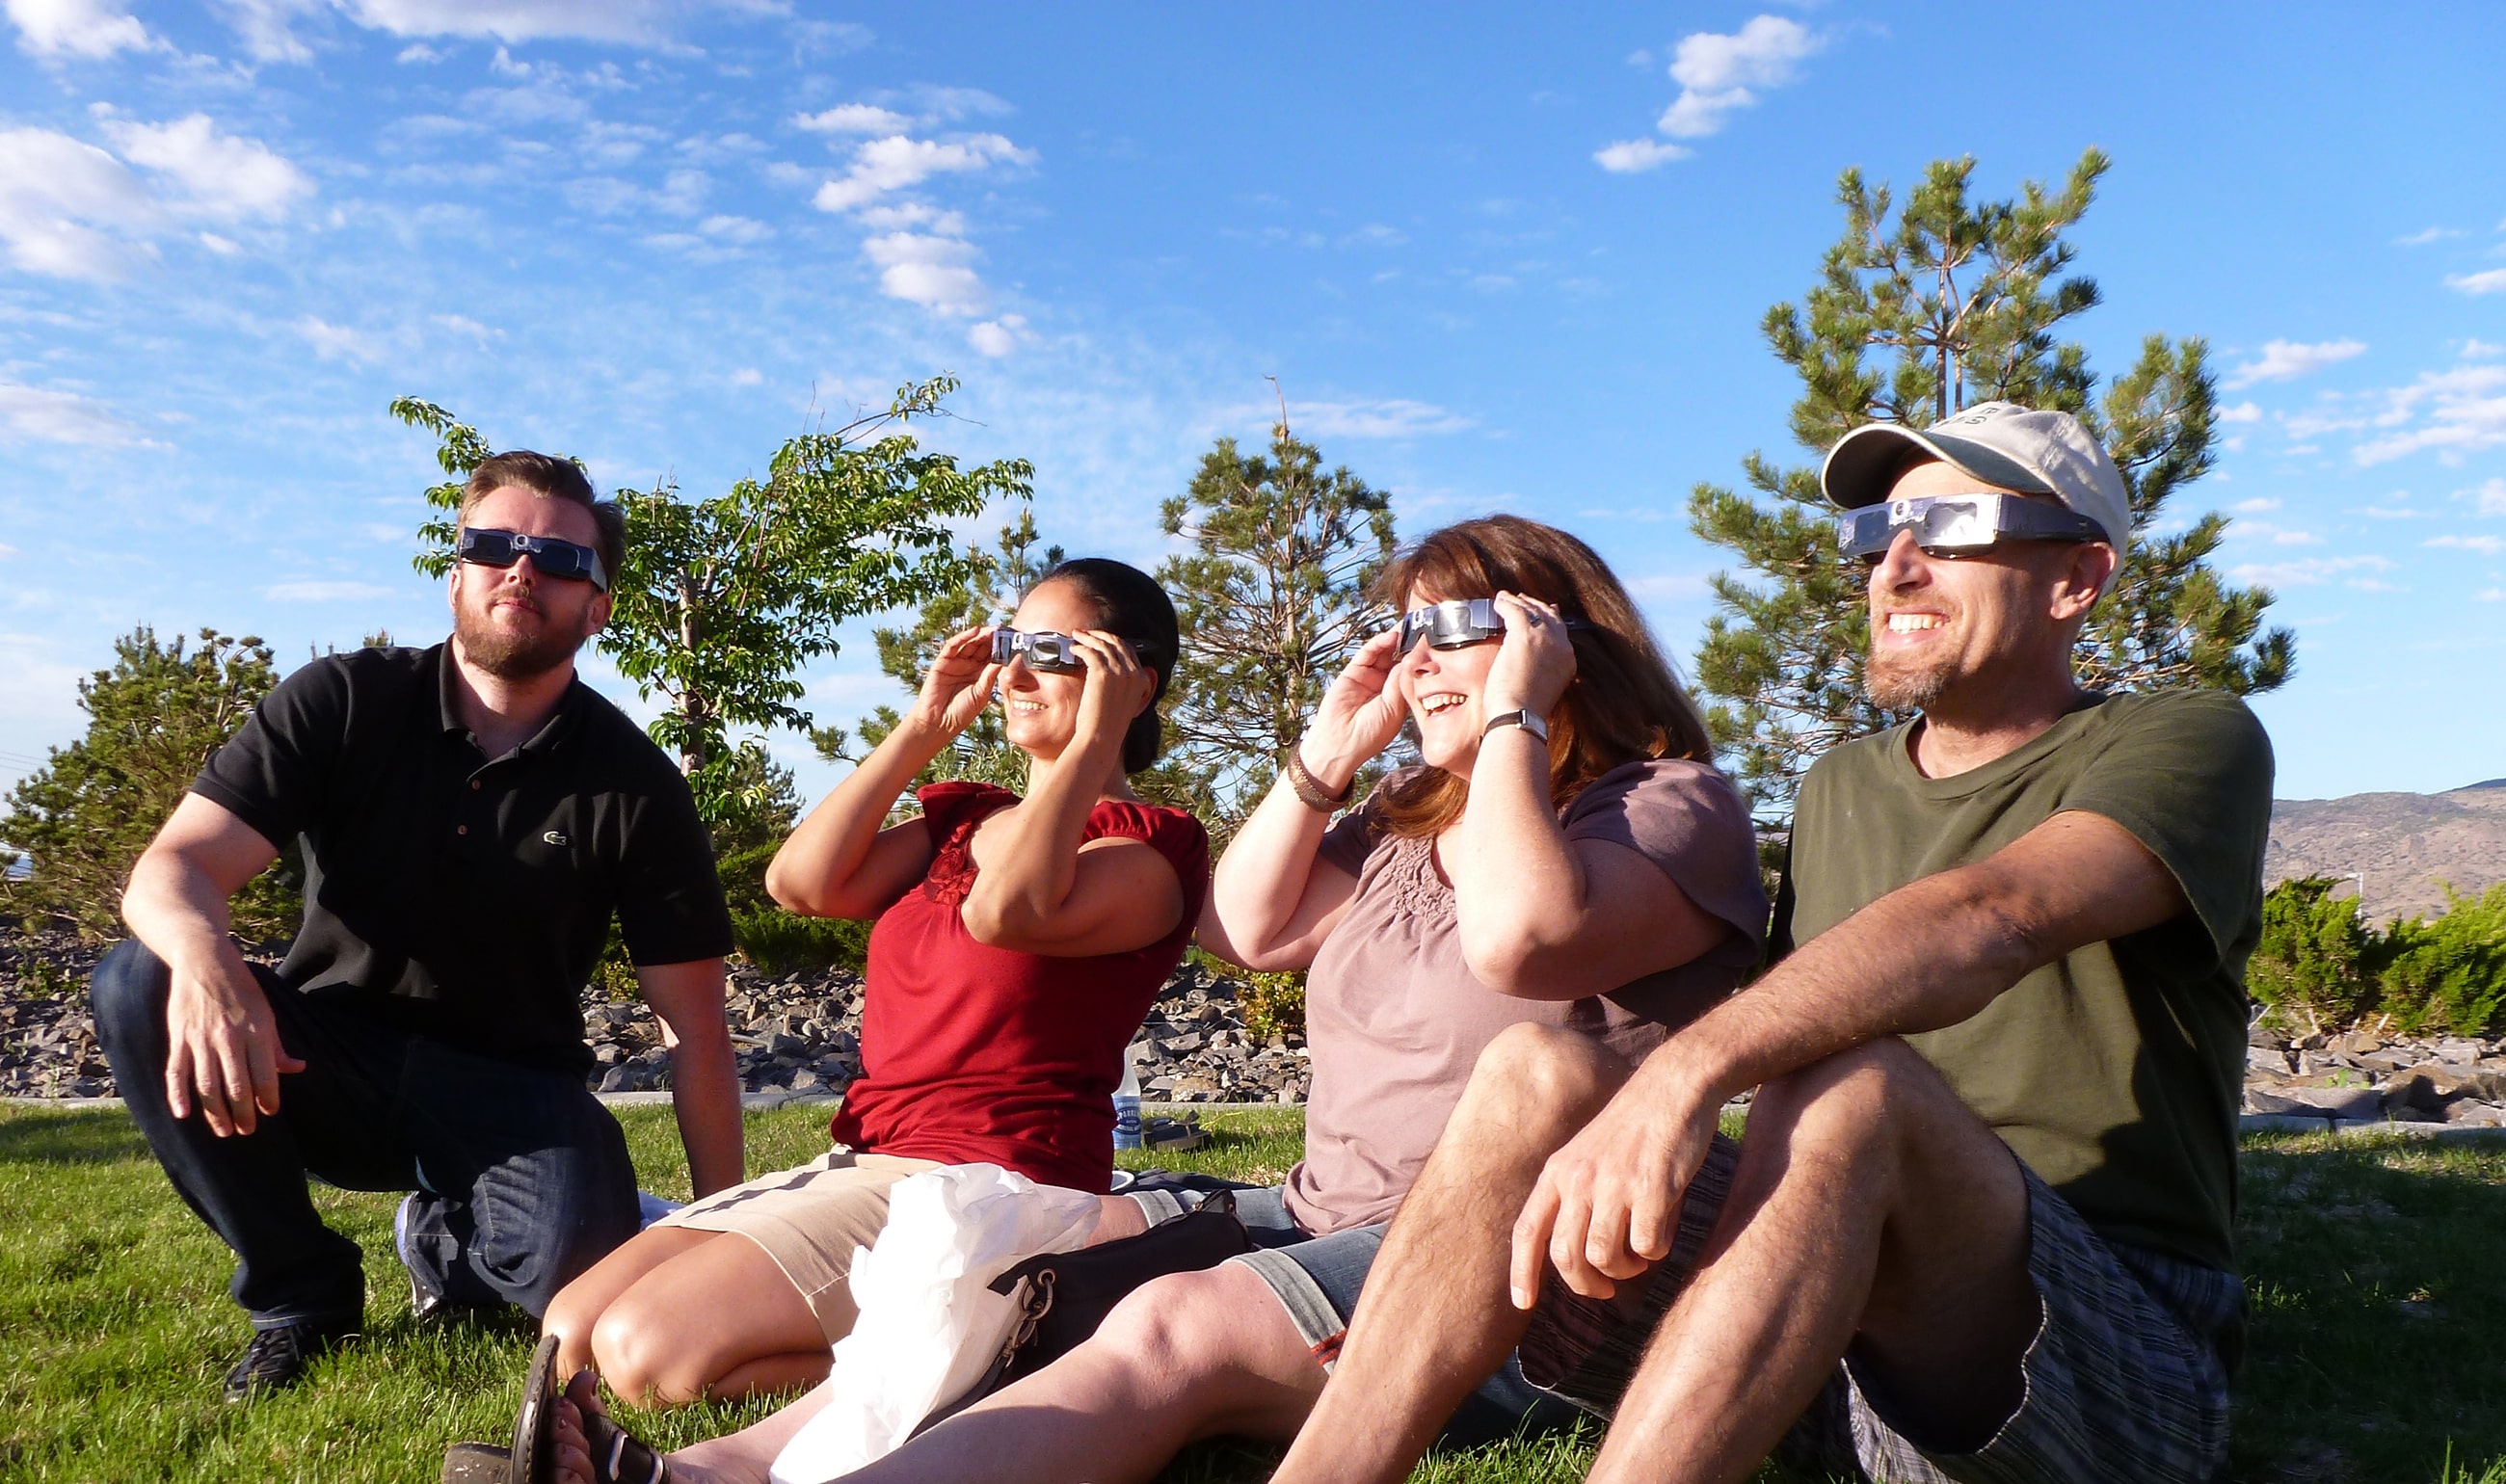 A group of 4 eclipse watchers wearing eclipse-viewing glasses (glasses that filter the Sun’s harmful UV rays, allowing you to look right at it) look up at the sun in the sky. They are smiling and sitting on a green lawn with trees behind them.